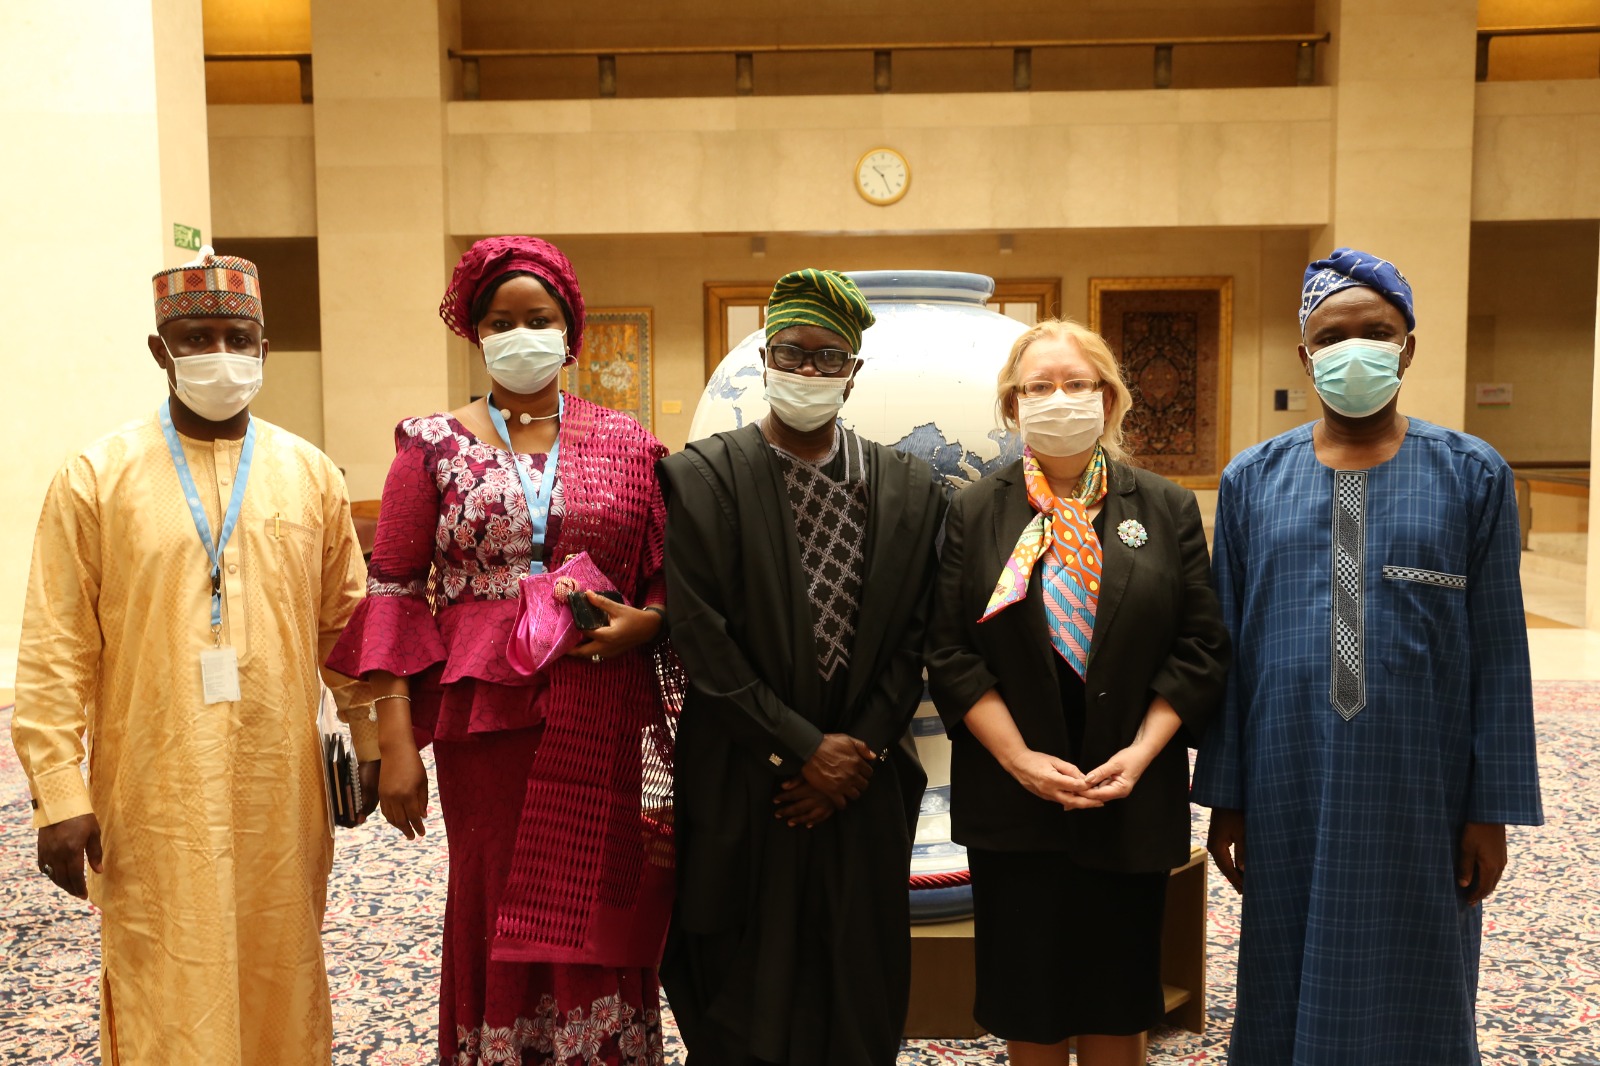 Some Members of the Nigerian Mission and H.E. Amb. A. R. Adejola and the D-DG UNOG at the United Nations Office Geneva and the D-G of UNOG, Tatiana Valovaya 